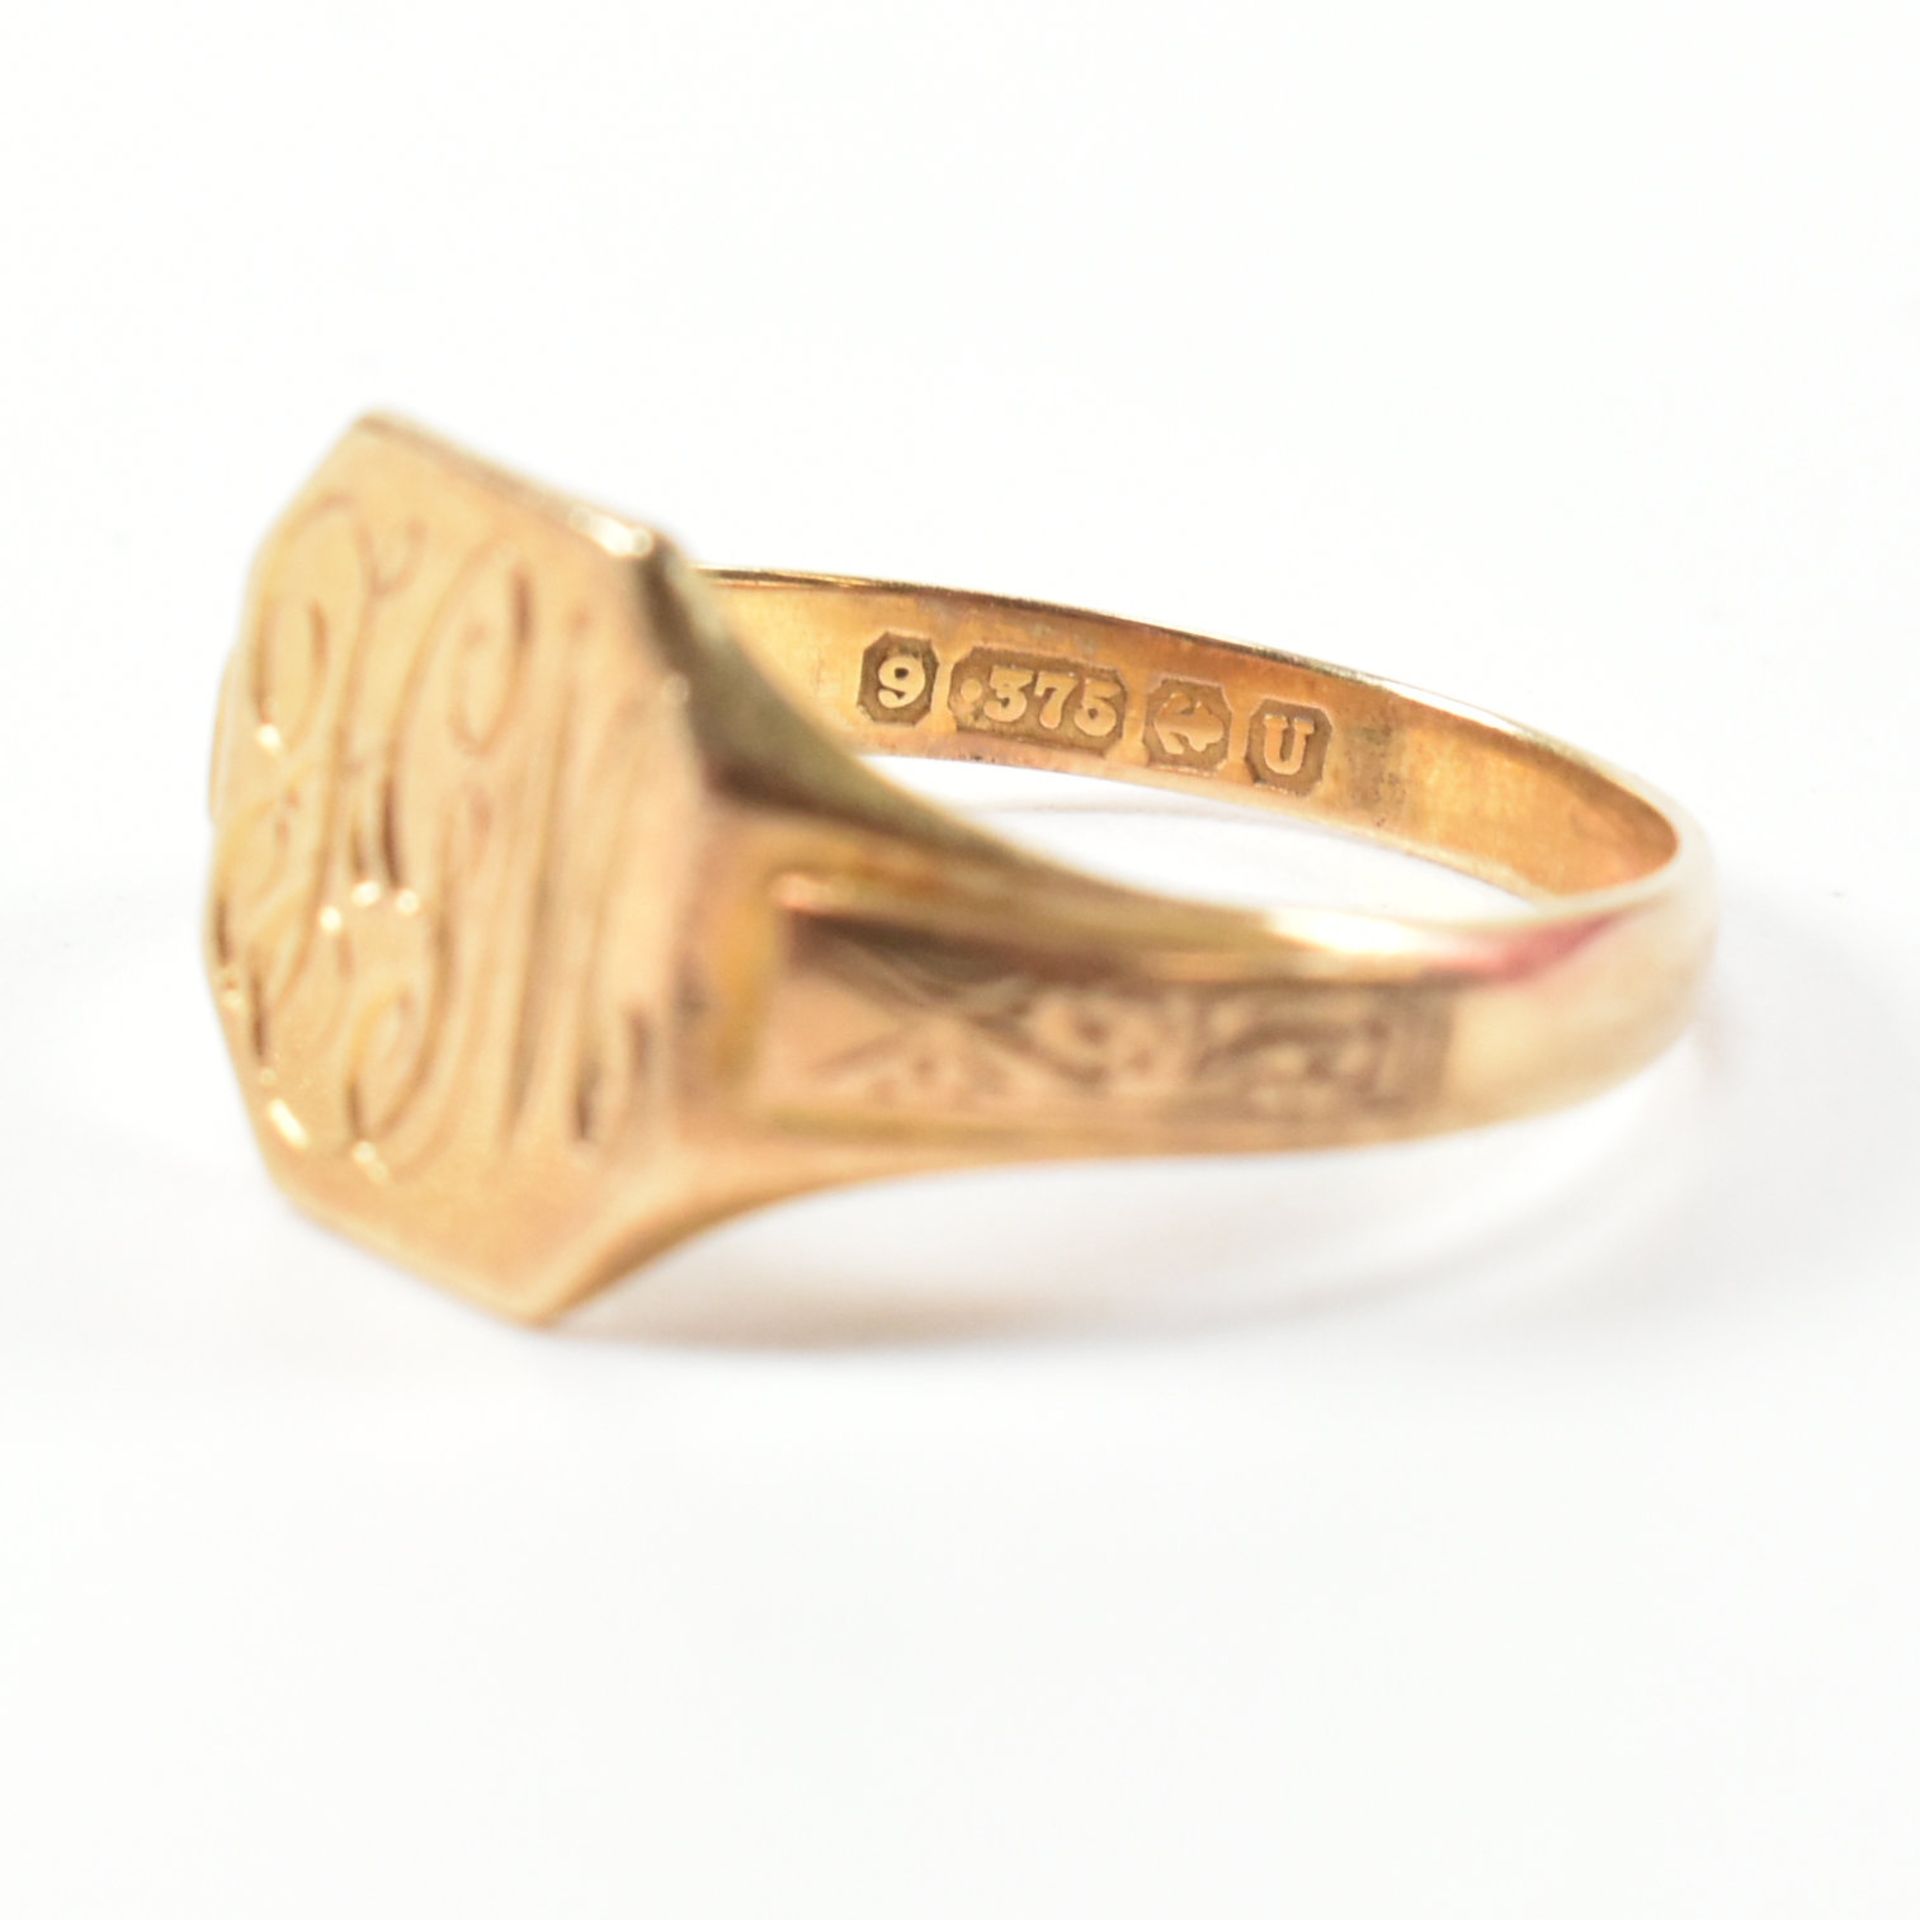 HALLMARKED 9CT GOLD ENGRAVED SIGNET RING - Image 7 of 8